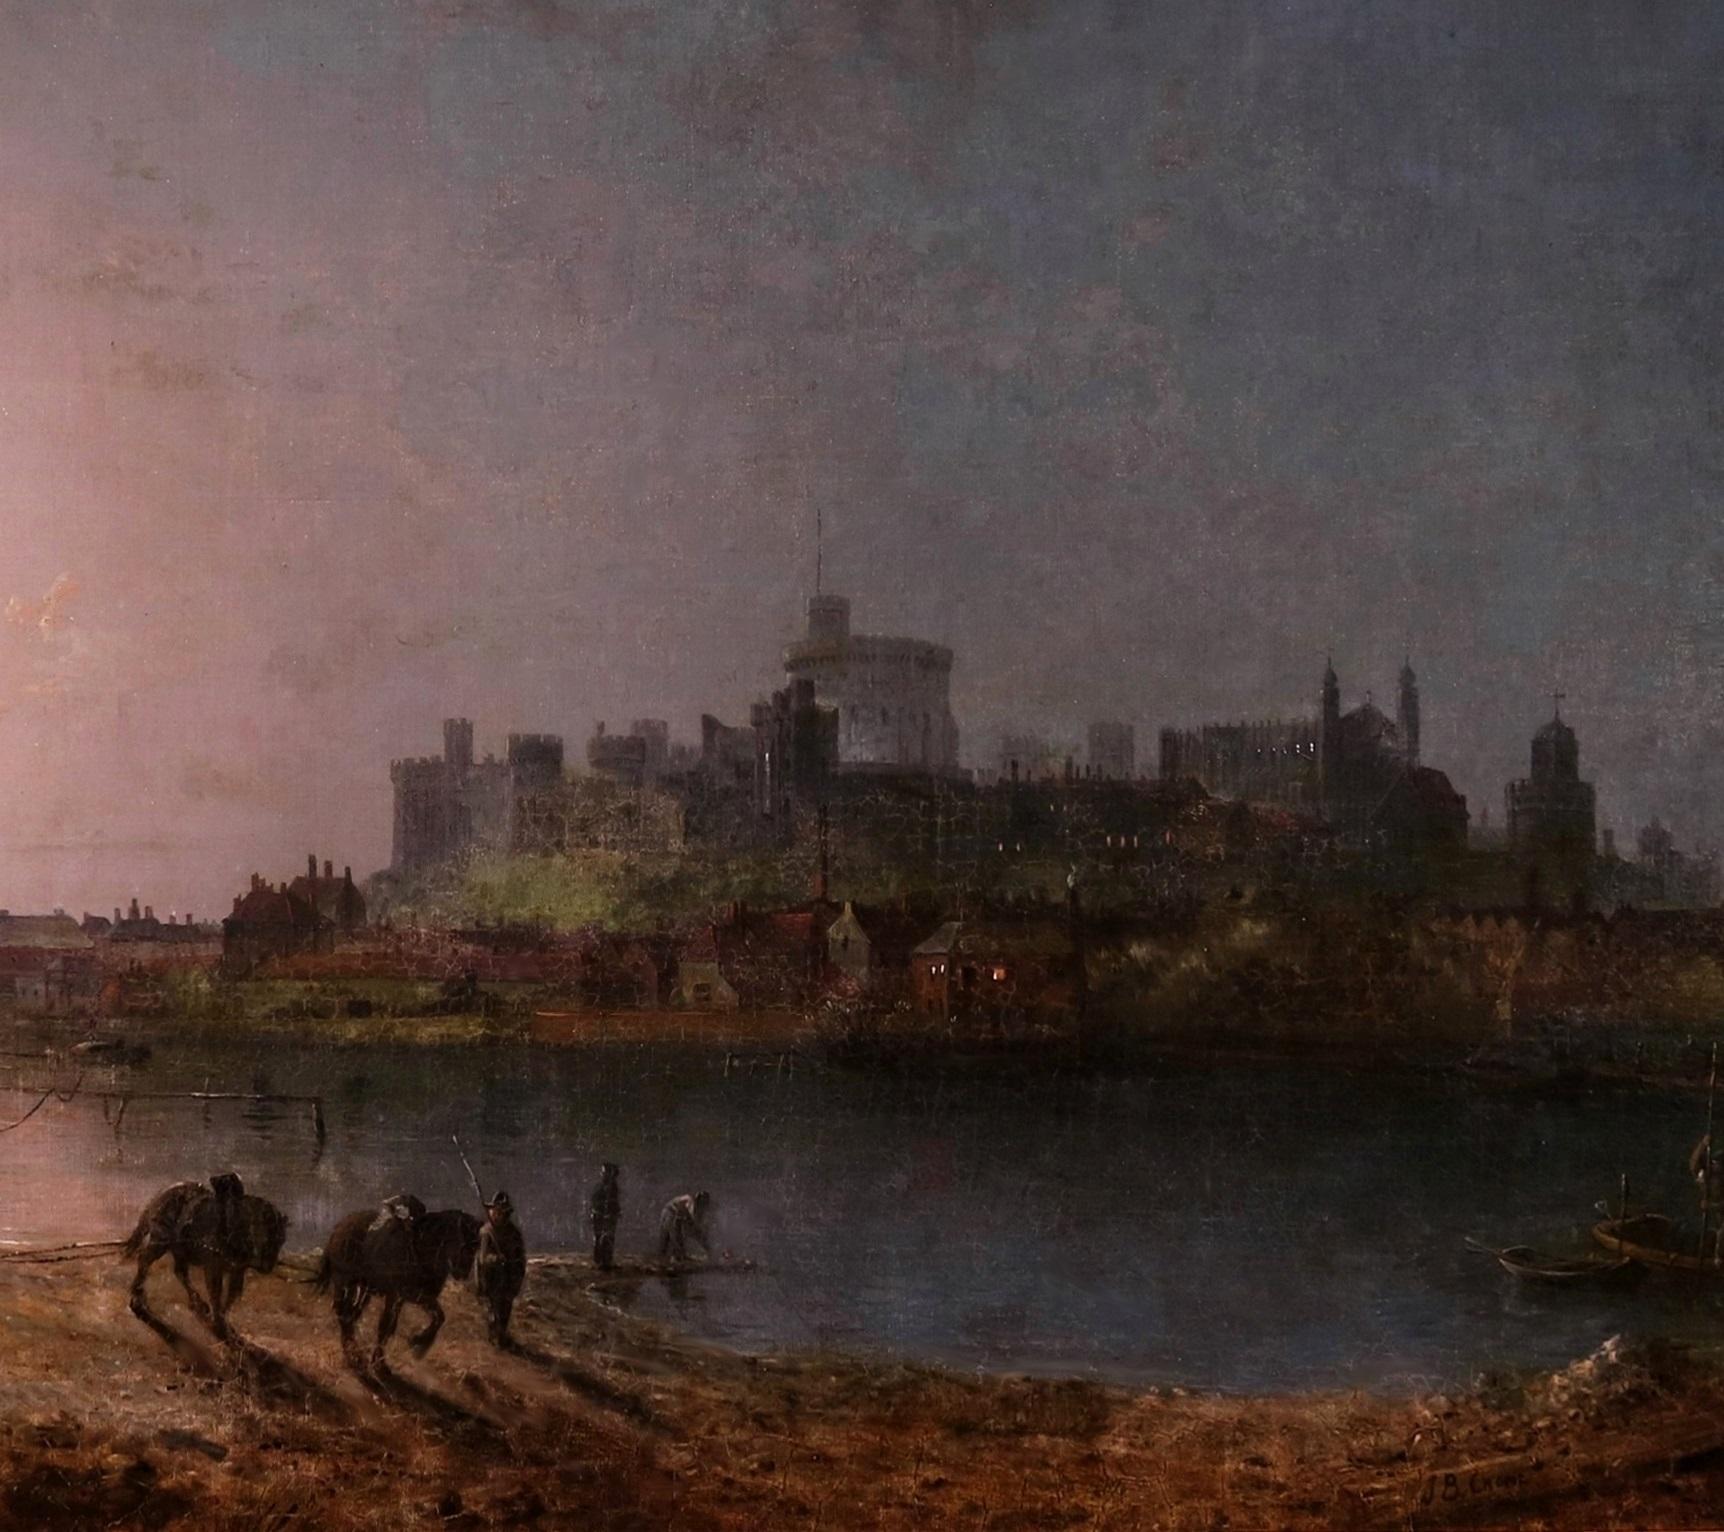 ‘Scene on the Thames - Moonlight’ by John Berney Crome (1794-1842). 

The painting – which depicts Windsor Castle and the River Thames under a harvest moon – is signed by the artist and was exhibited at the Royal Society of British Artists in 1837. 